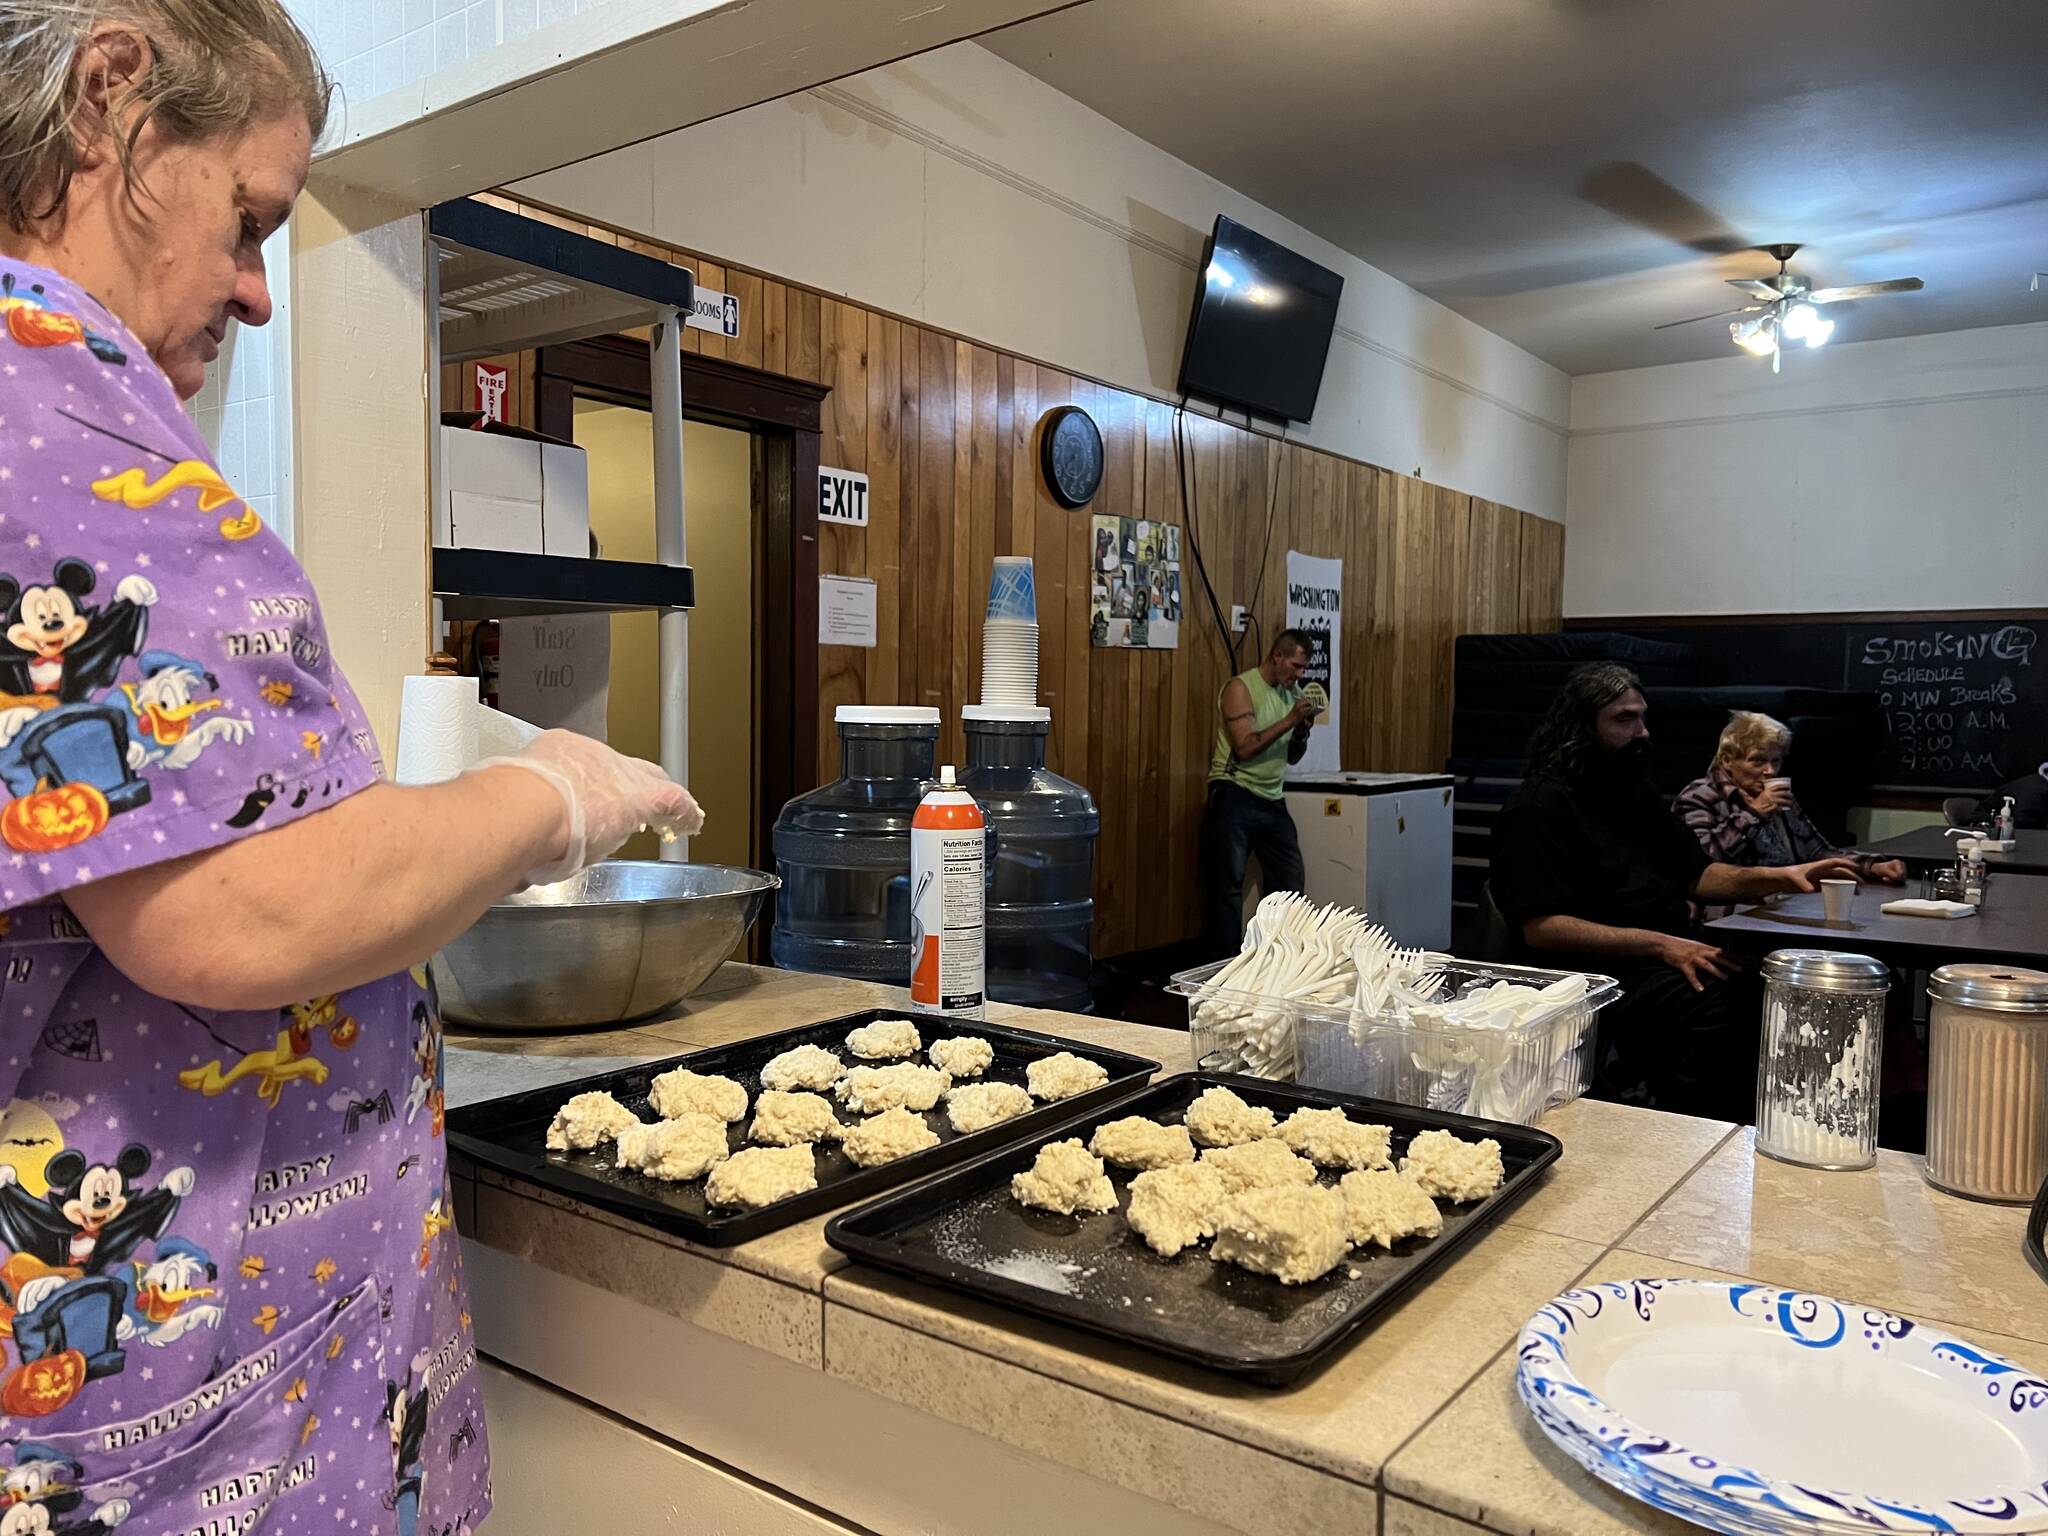 Clayton Franke / The Daily World
Janet, a Chaplains on the Harbor employee, prepares dinner Monday evening at the cold weather shelter in Westport.